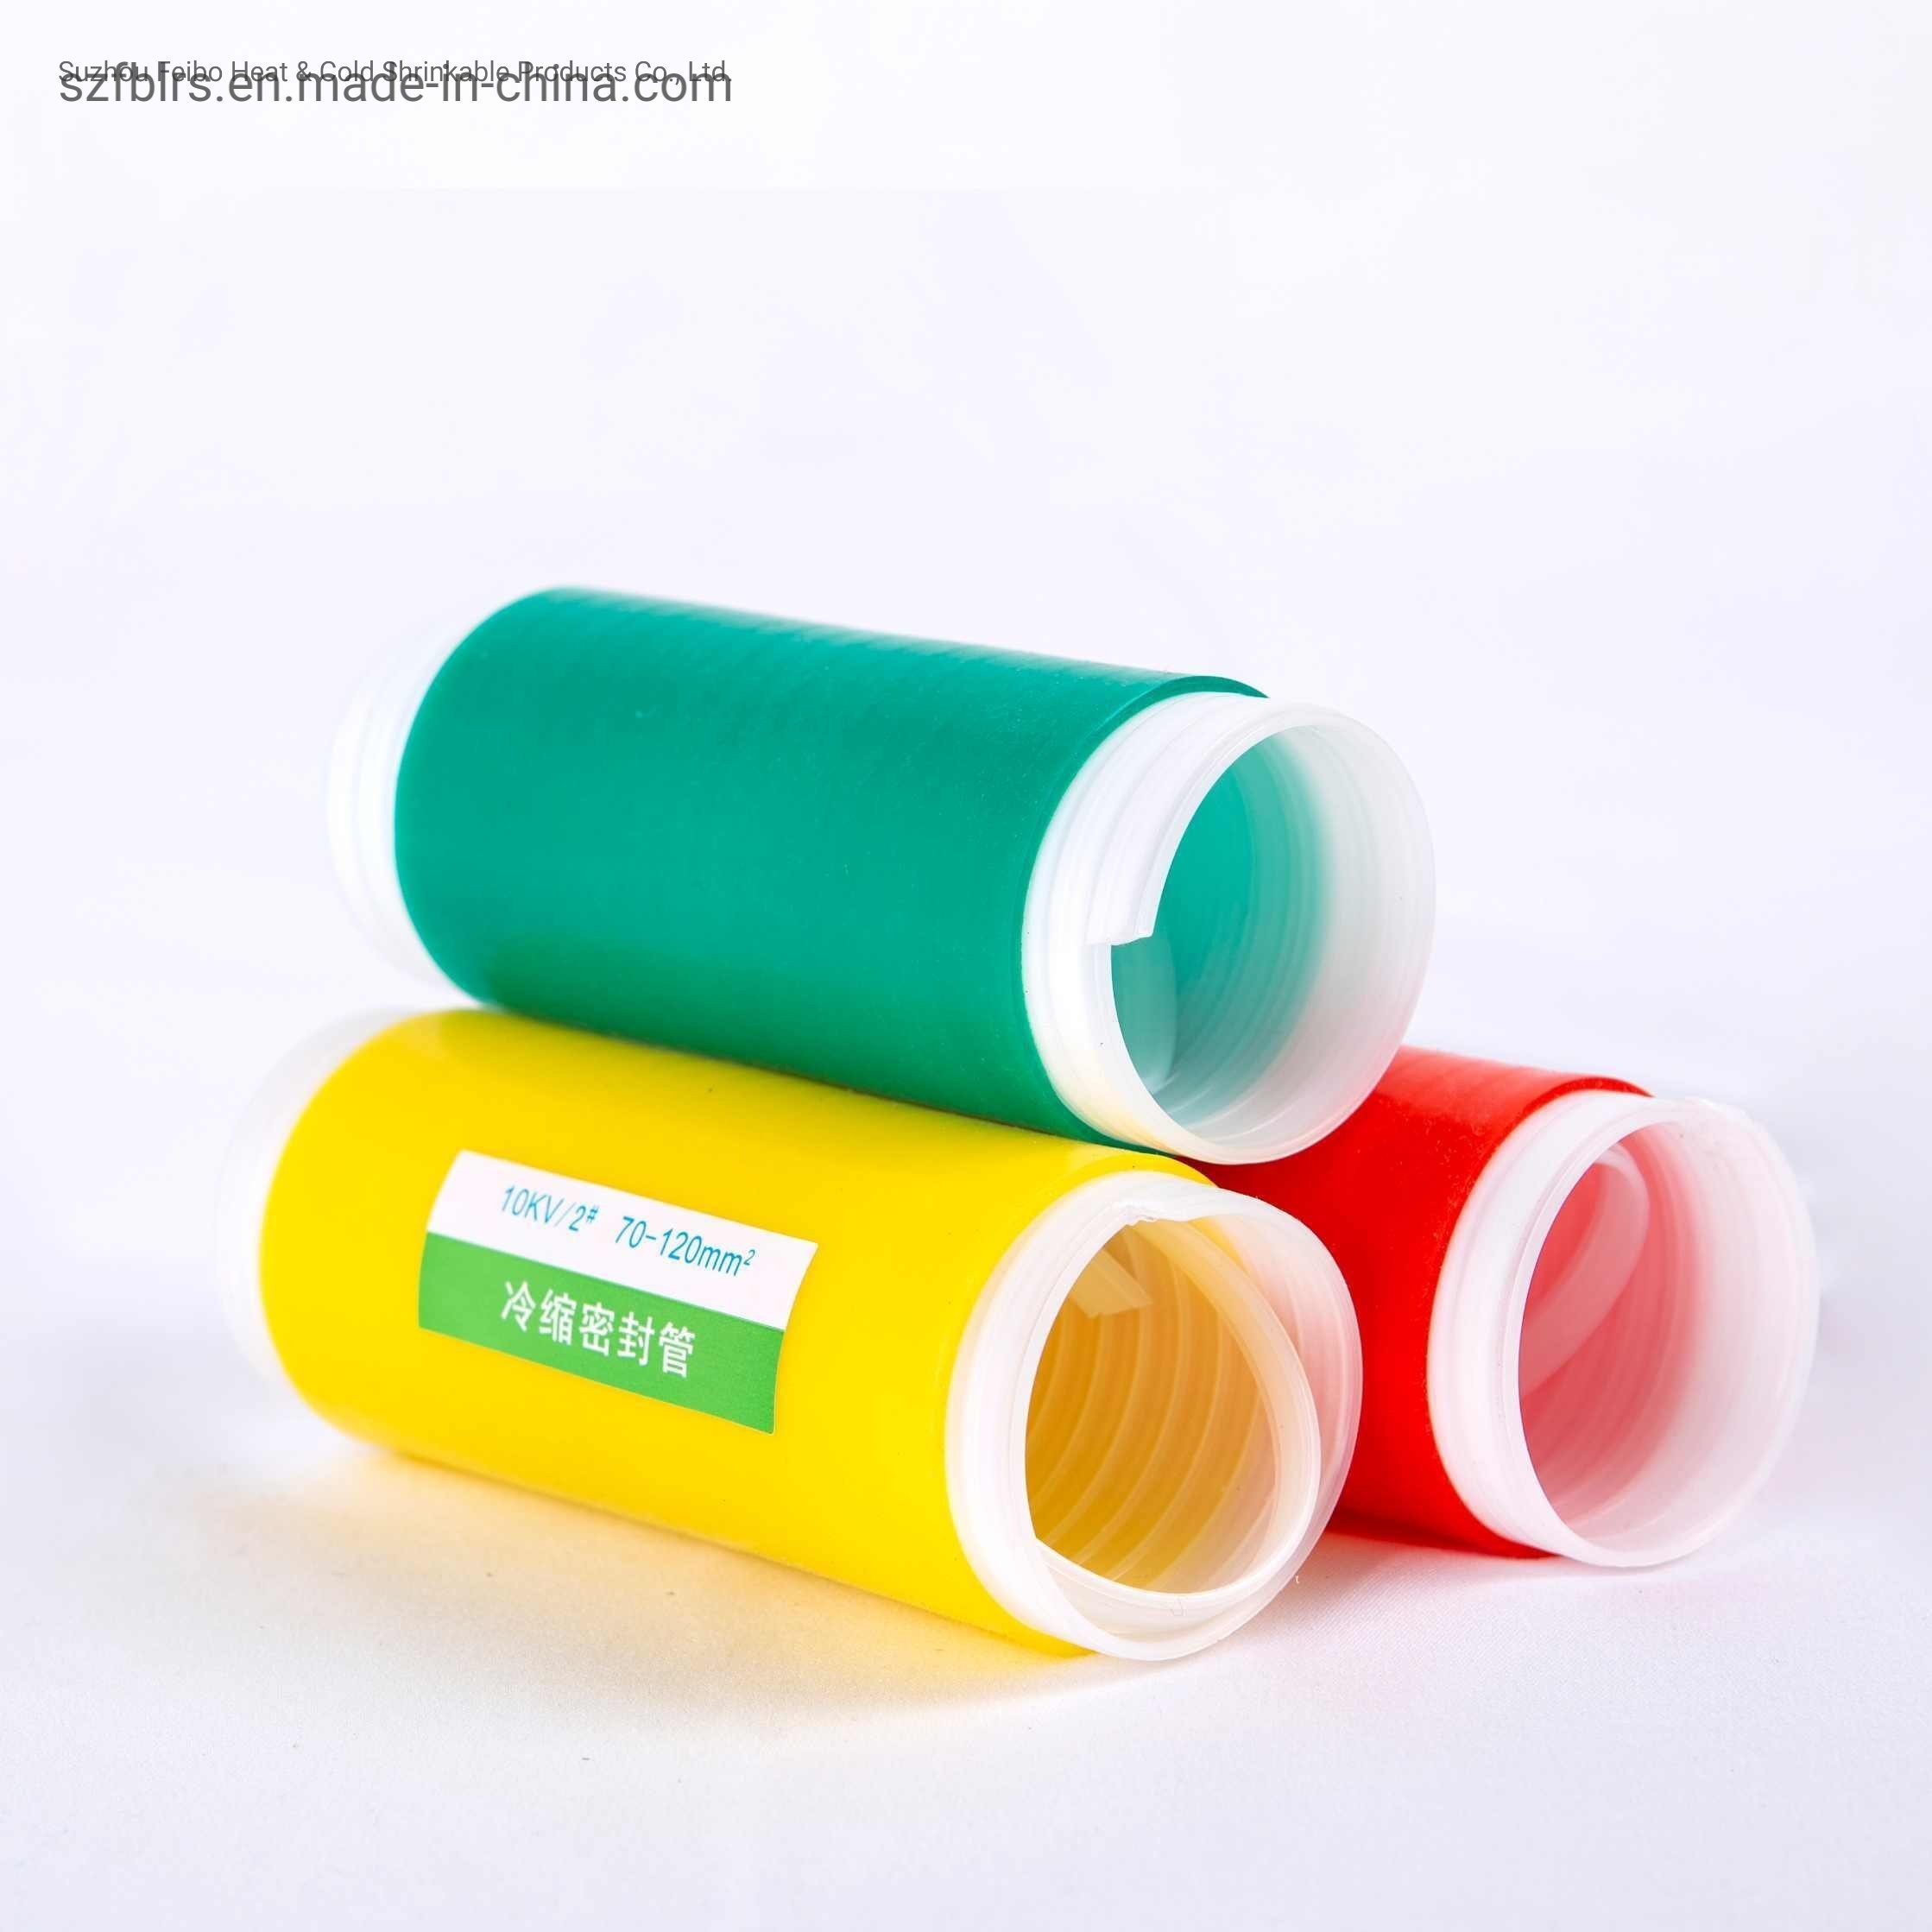 Cold Shrink Silicone Rubber Sleeve Bicycle Handlebars Silicone Rubber Badminton Grips